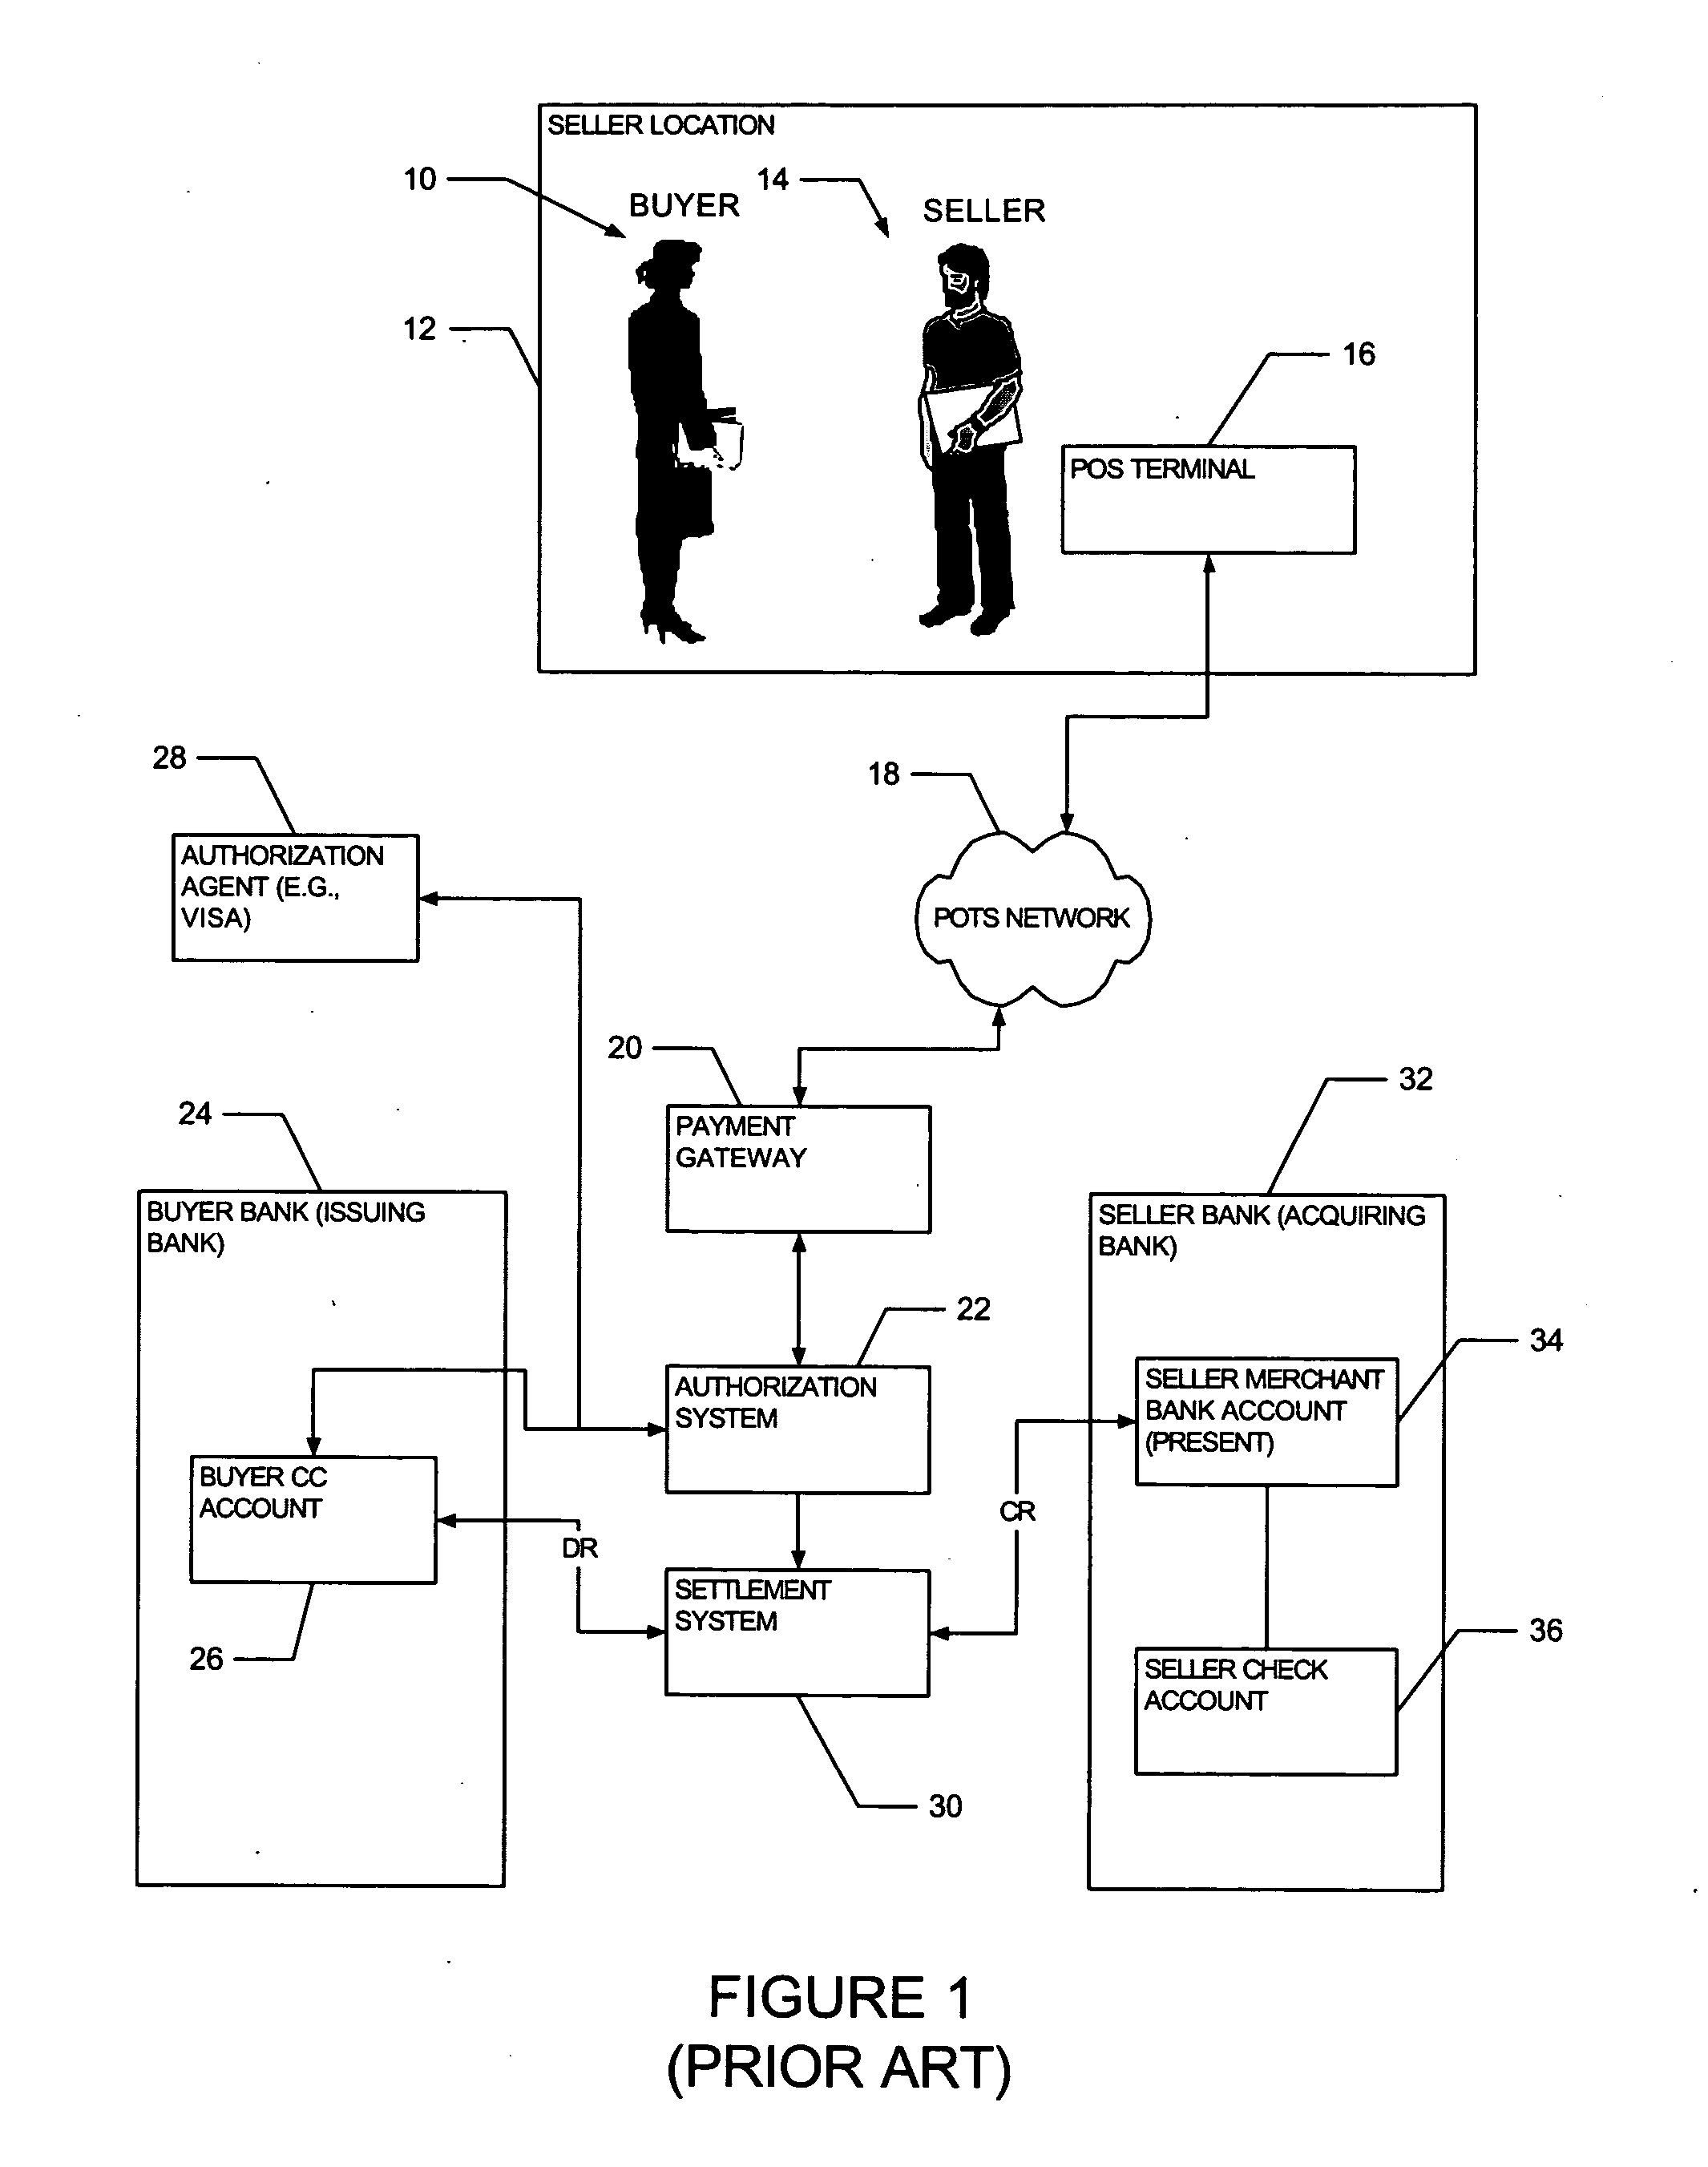 Method and system to process credit card payment transactions initiated by a merchant